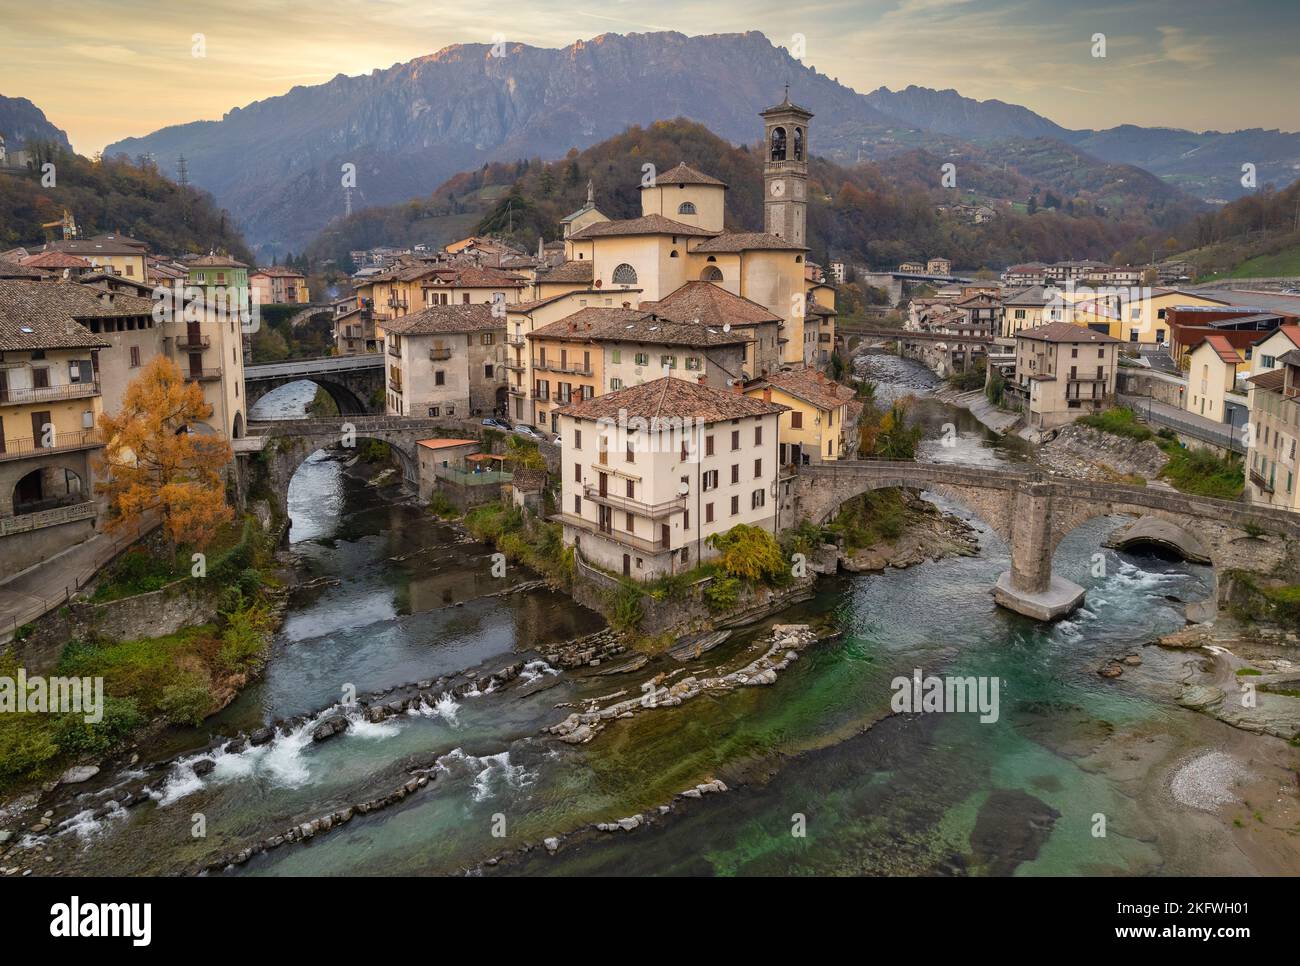 Aerial view of ancient church and crossing rivers surrounded by Alps mountains, San Giovanni Bianco Village, Valbrembana, Bergamo, Lombardy, Italy Stock Photo